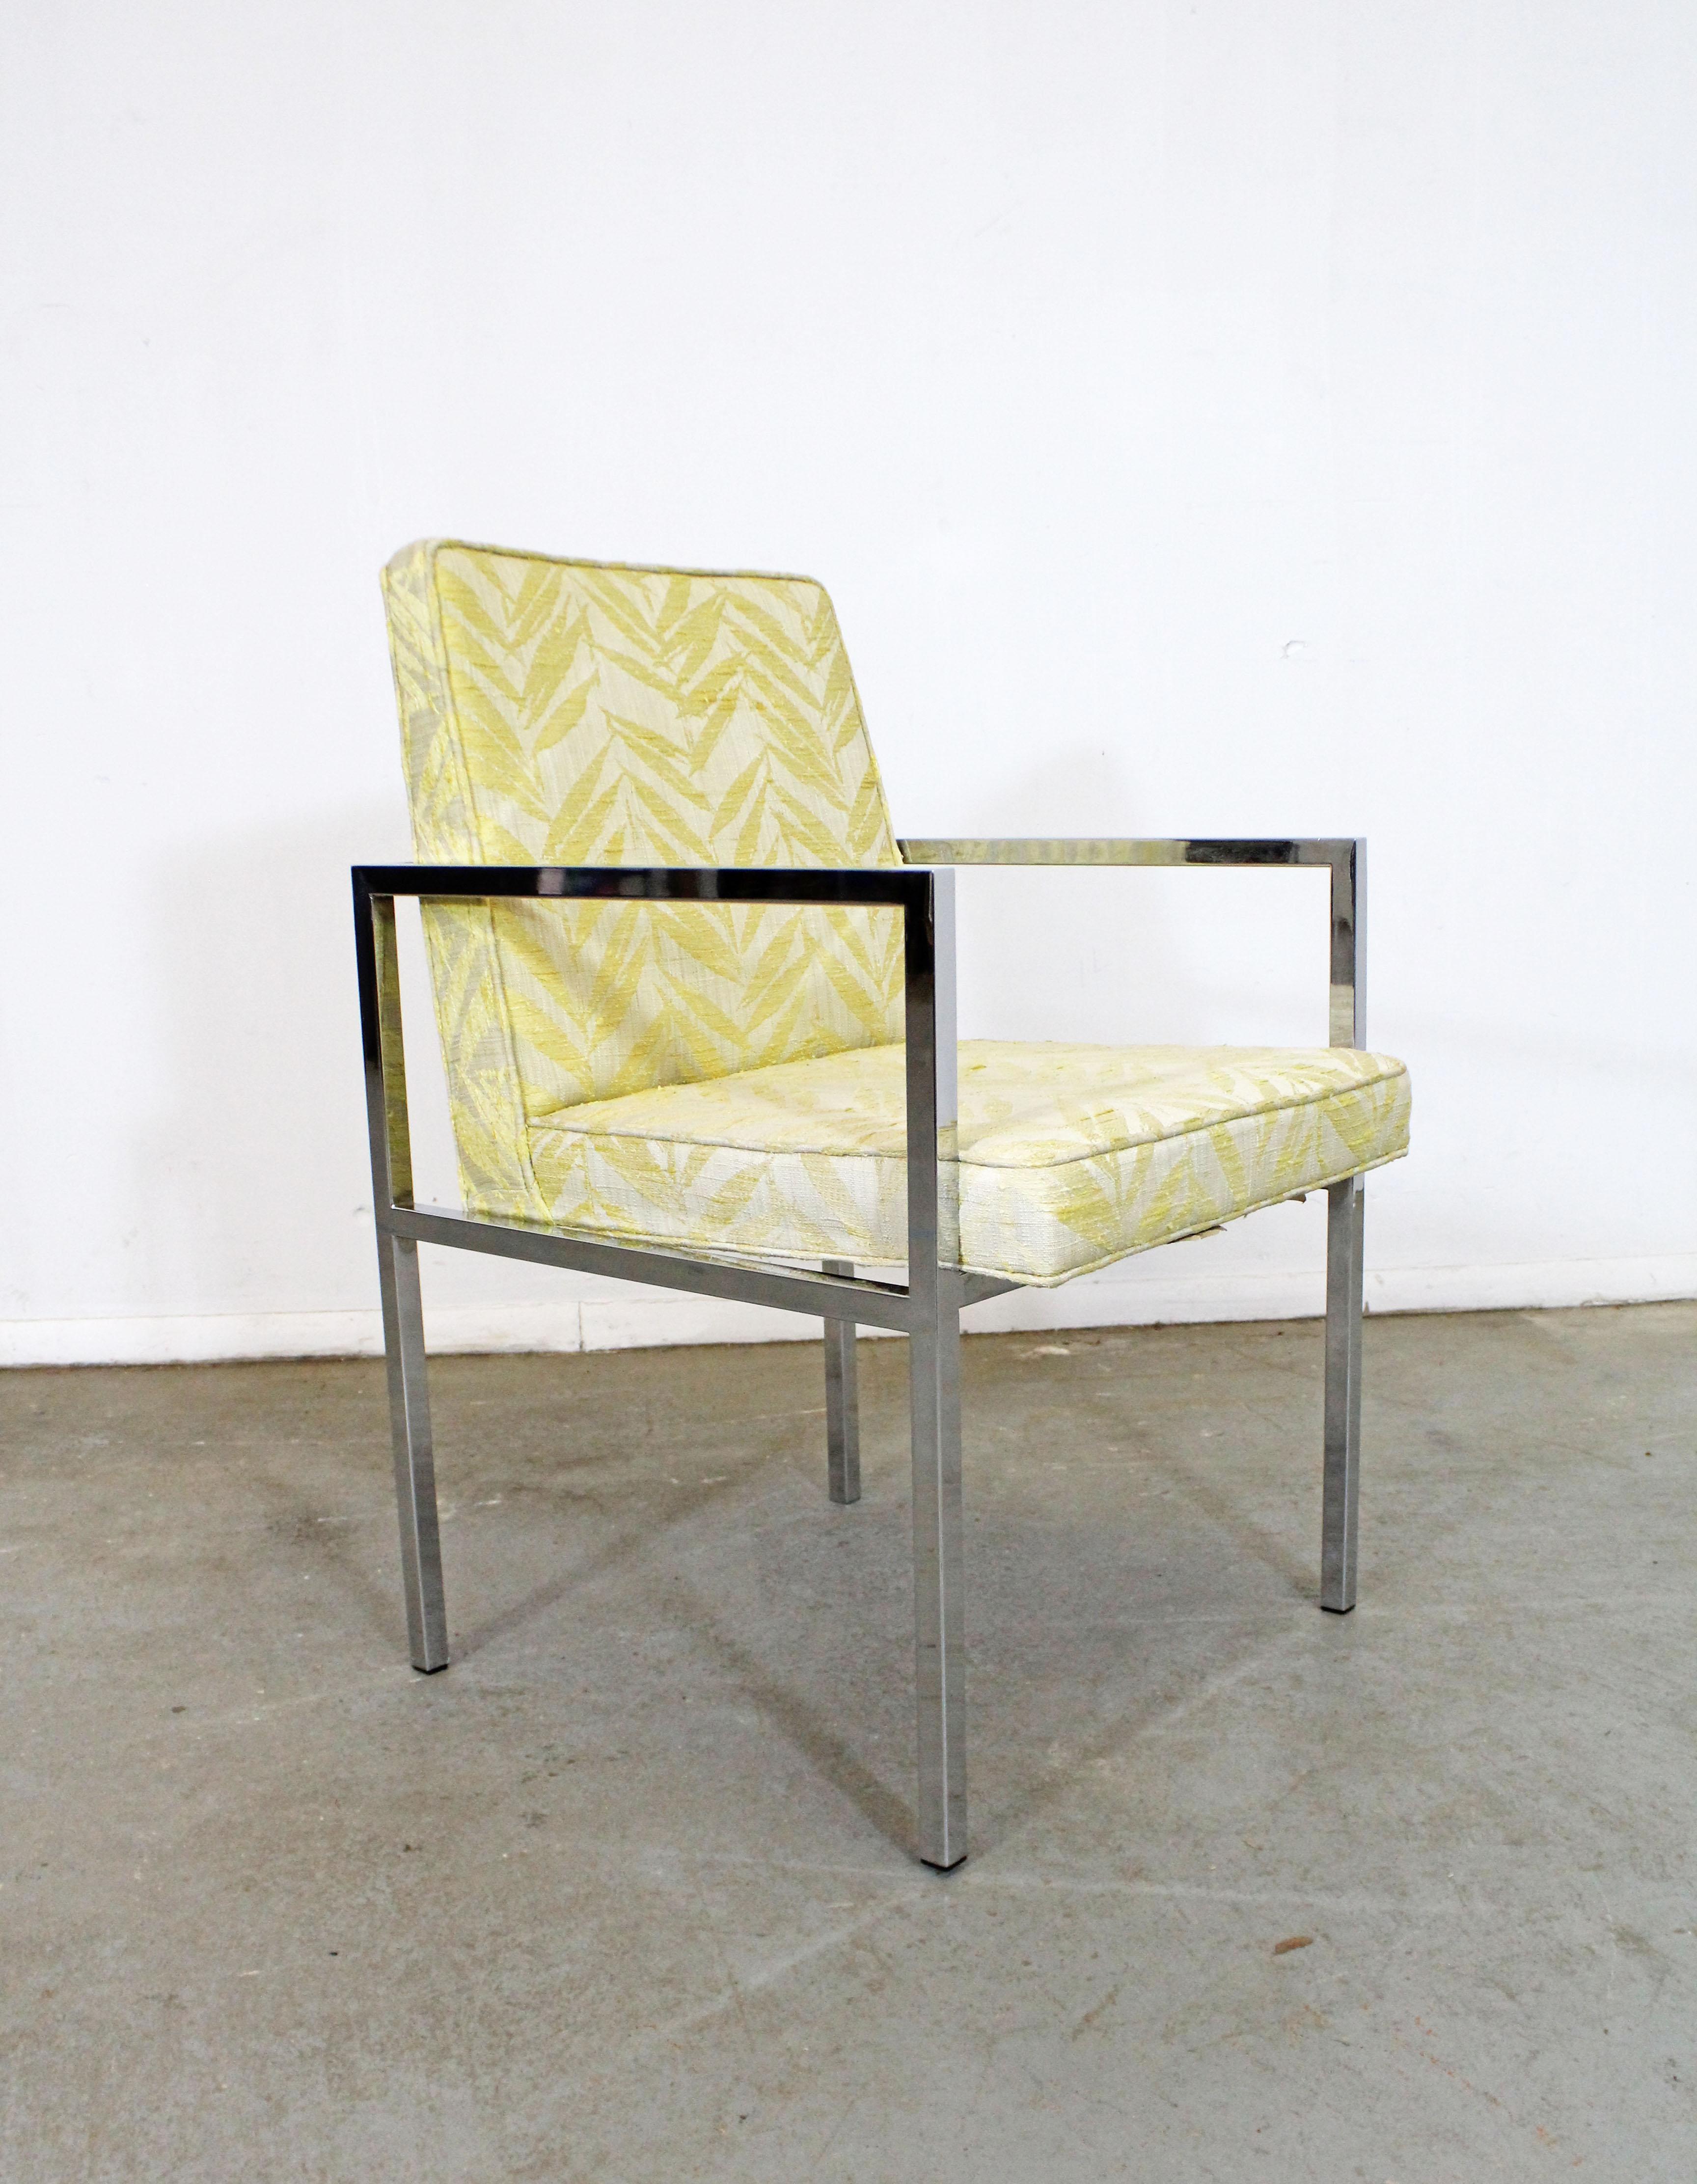 What a find. Offered is a vintage Mid-Century Modern chrome armchair attributed to Milo Baughman by Founders. Features a square tube chrome frame. It's in good condition, shows some age wear on fabric and chrome, and is missing one foot cup. Still a